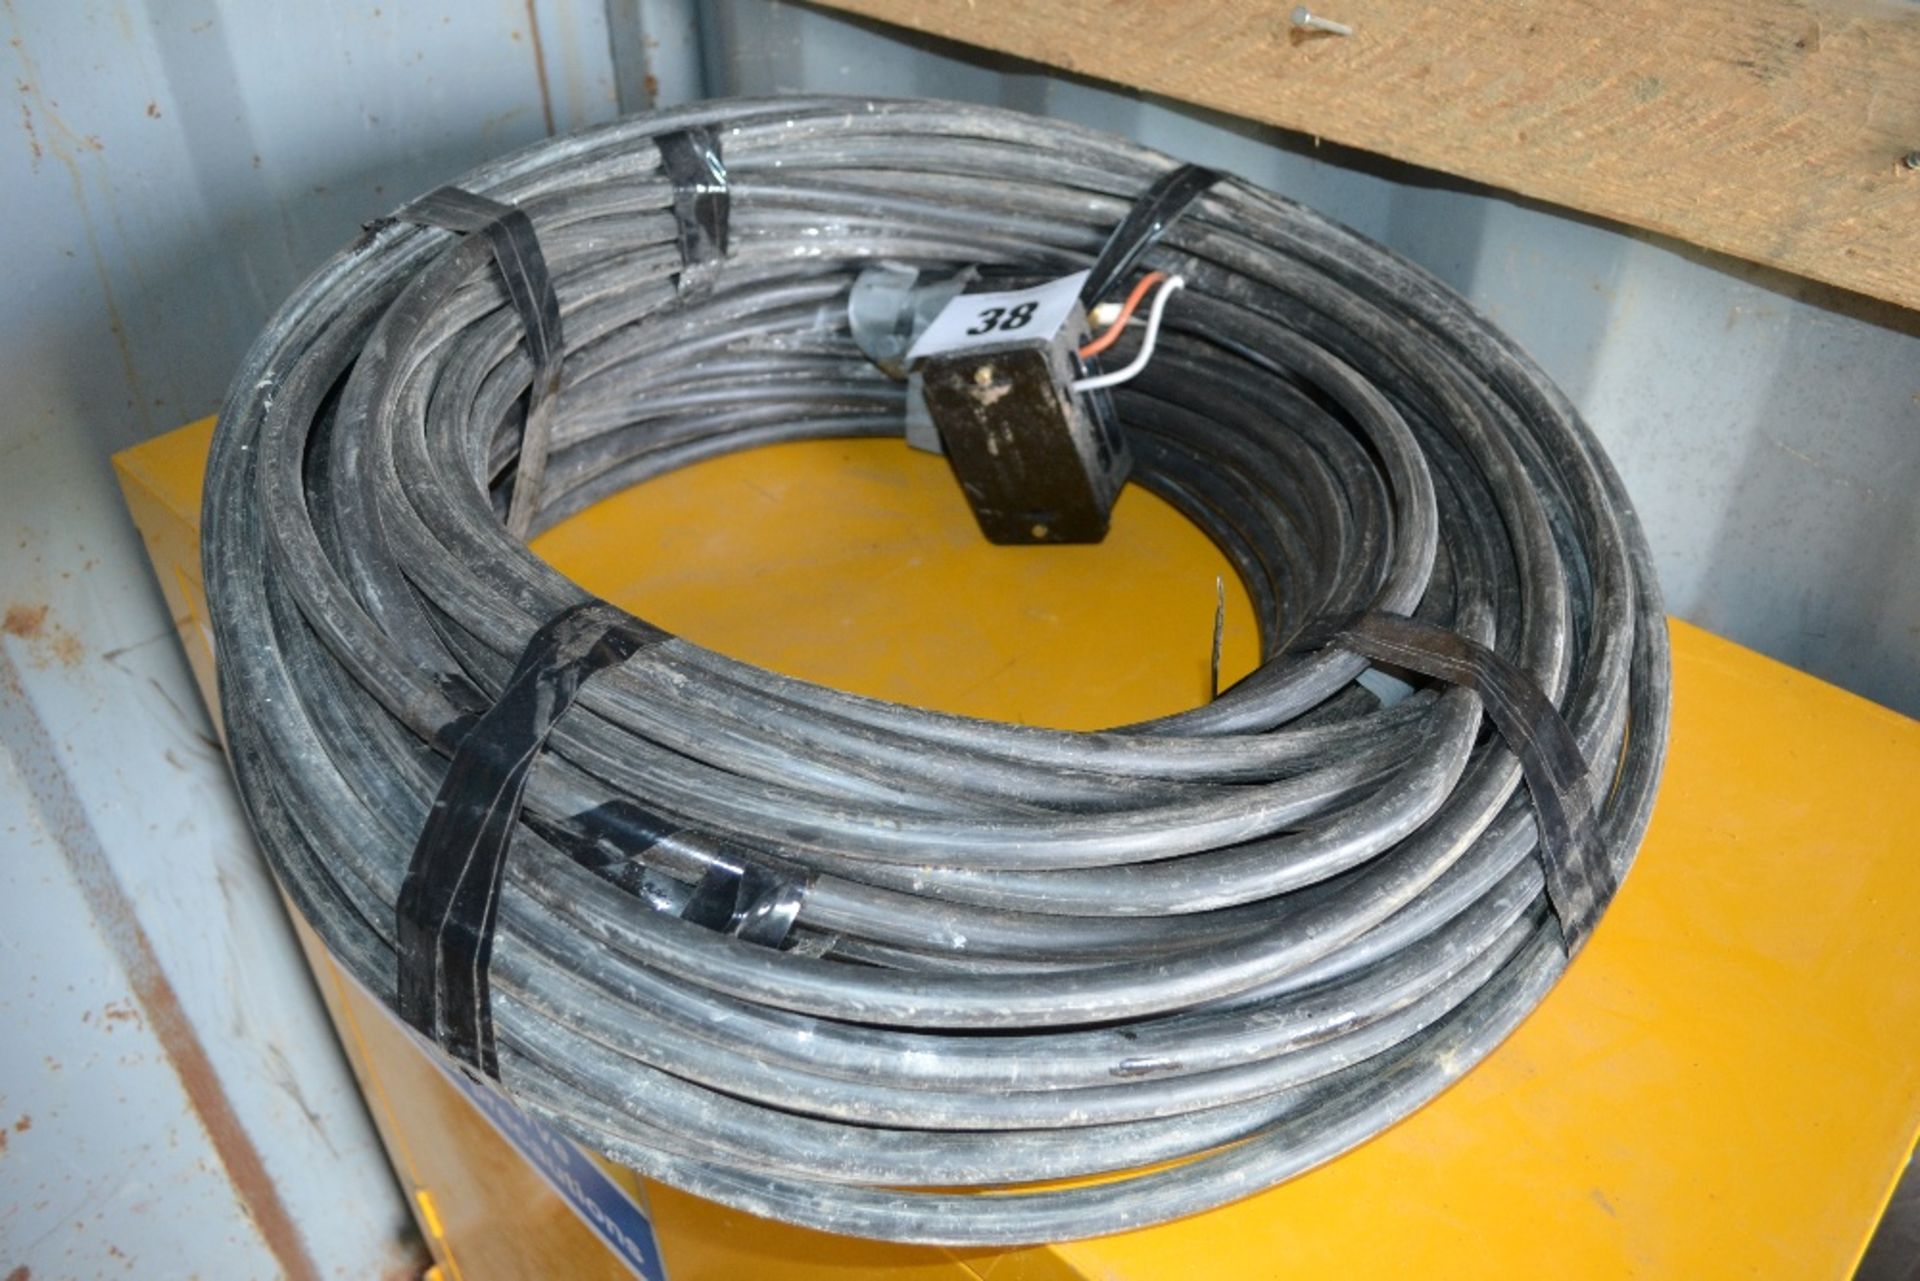 Large quantity of armoured cable.